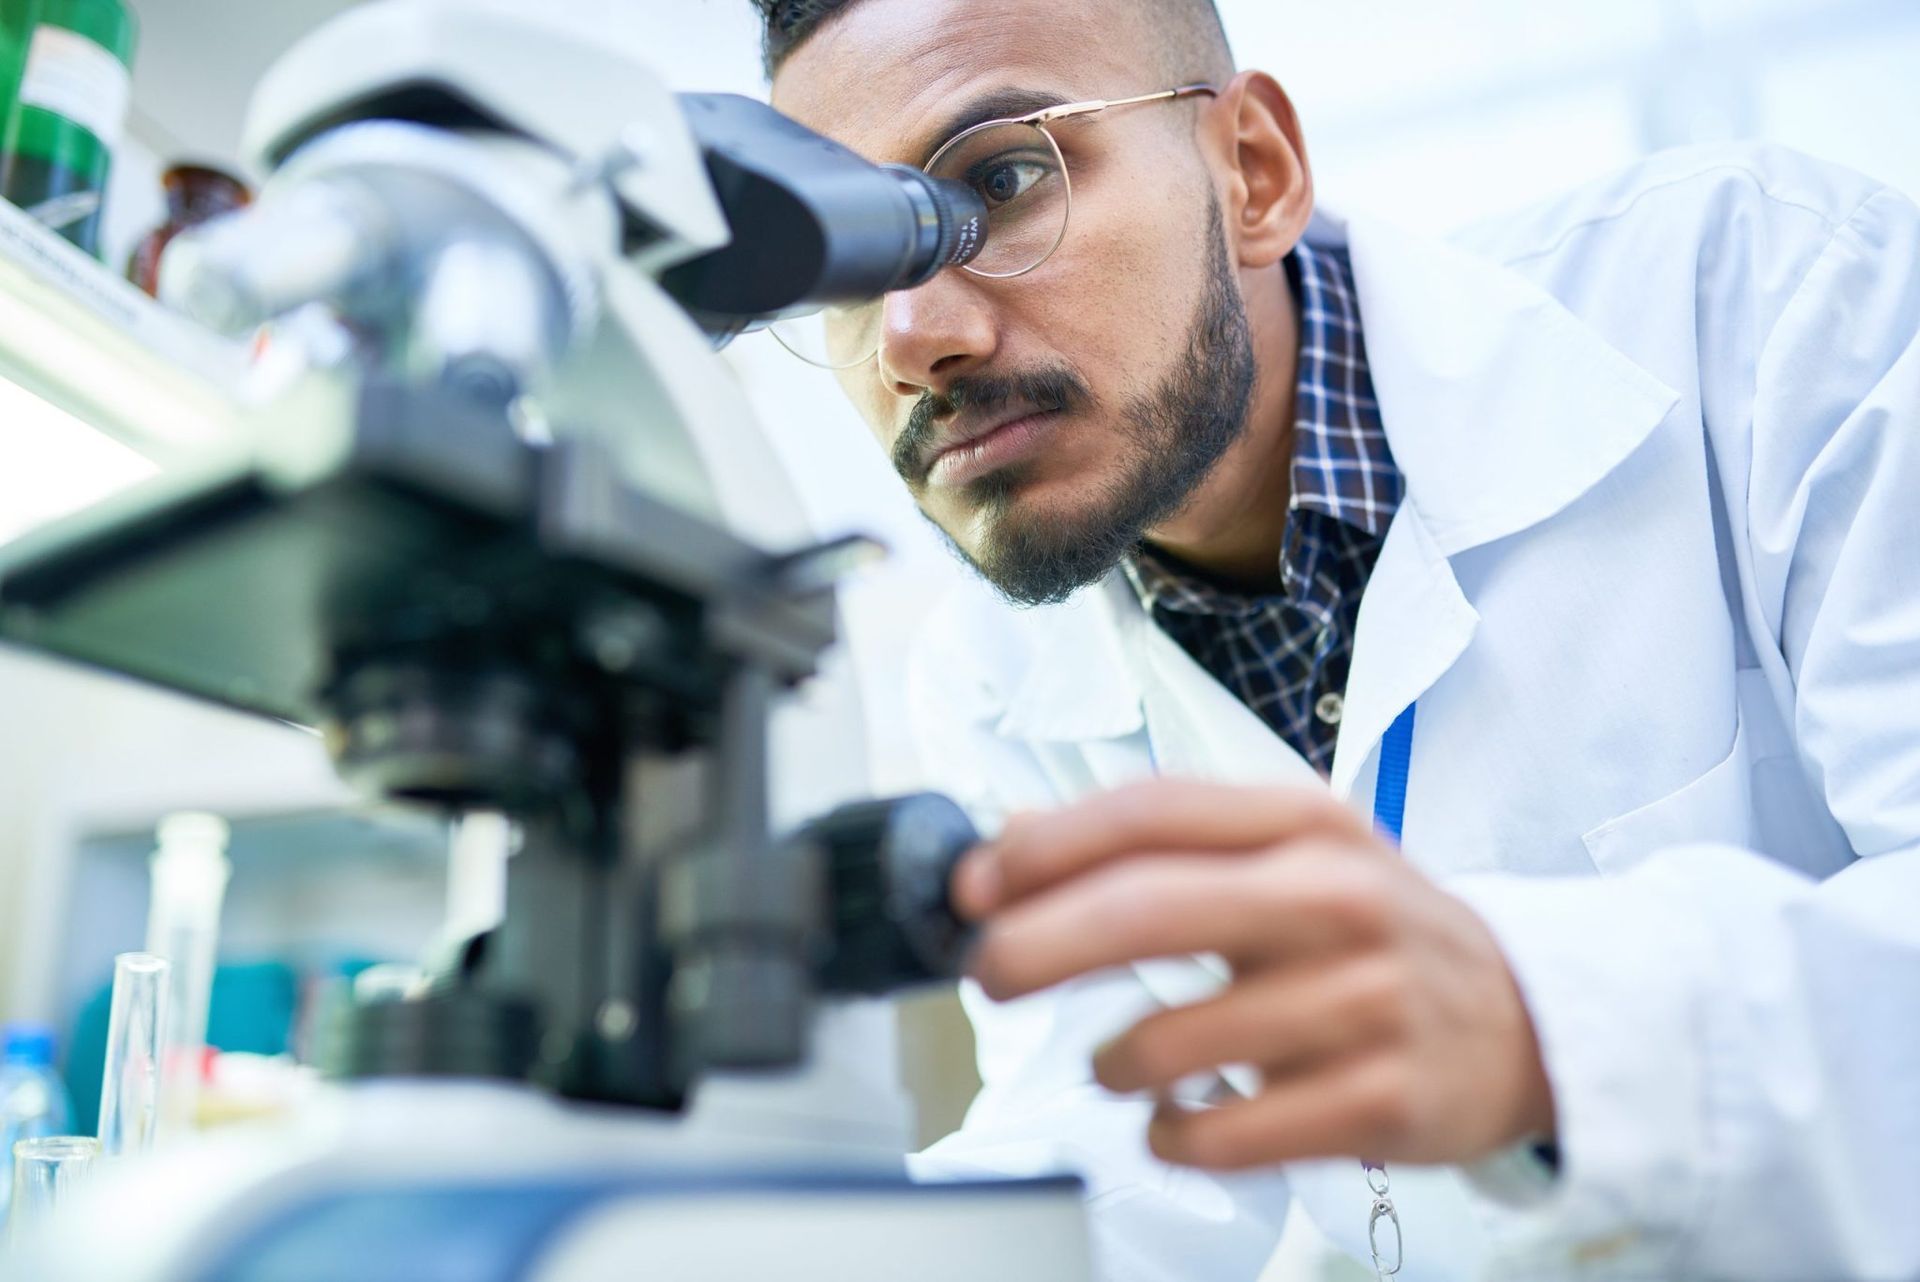 A scientist is looking through a microscope in a laboratory.